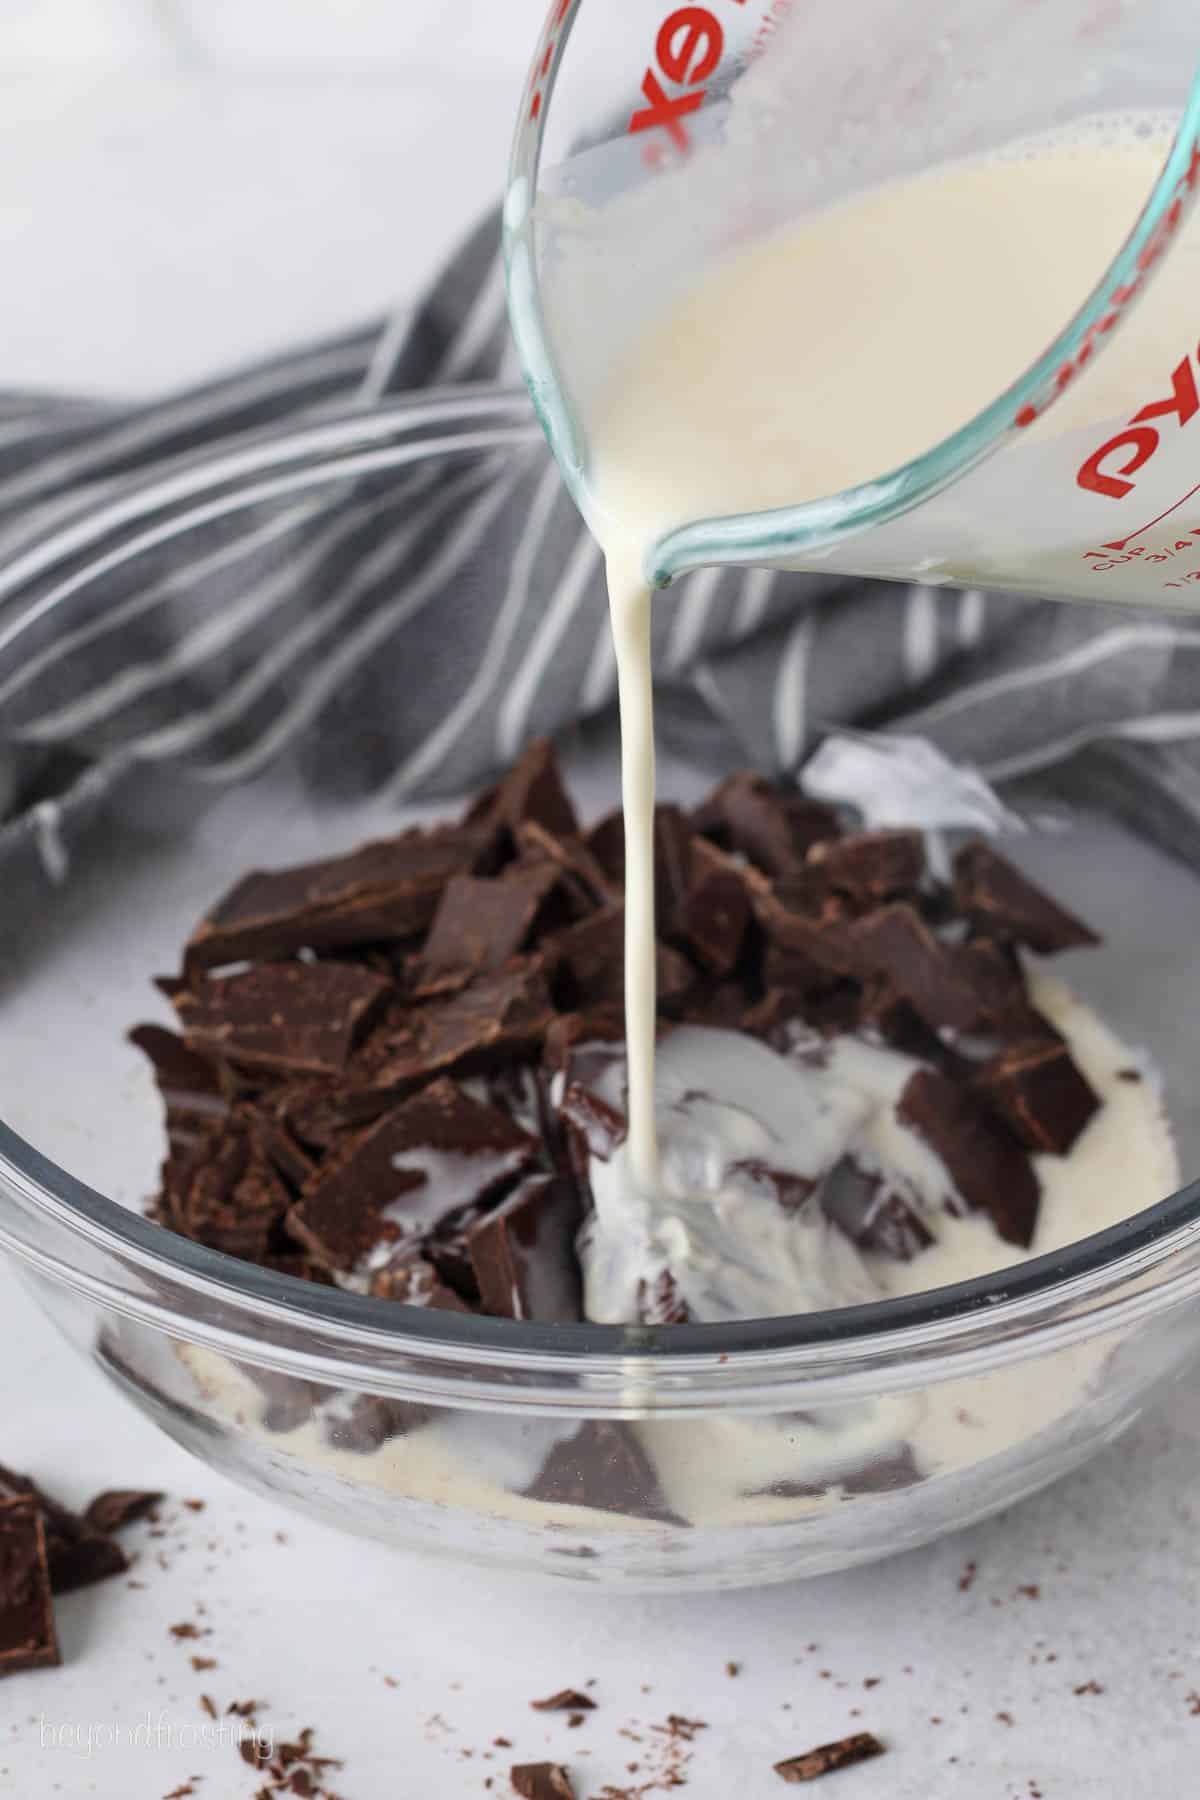 Heated heavy cream is poured over chopped chocolate in a glass bowl.